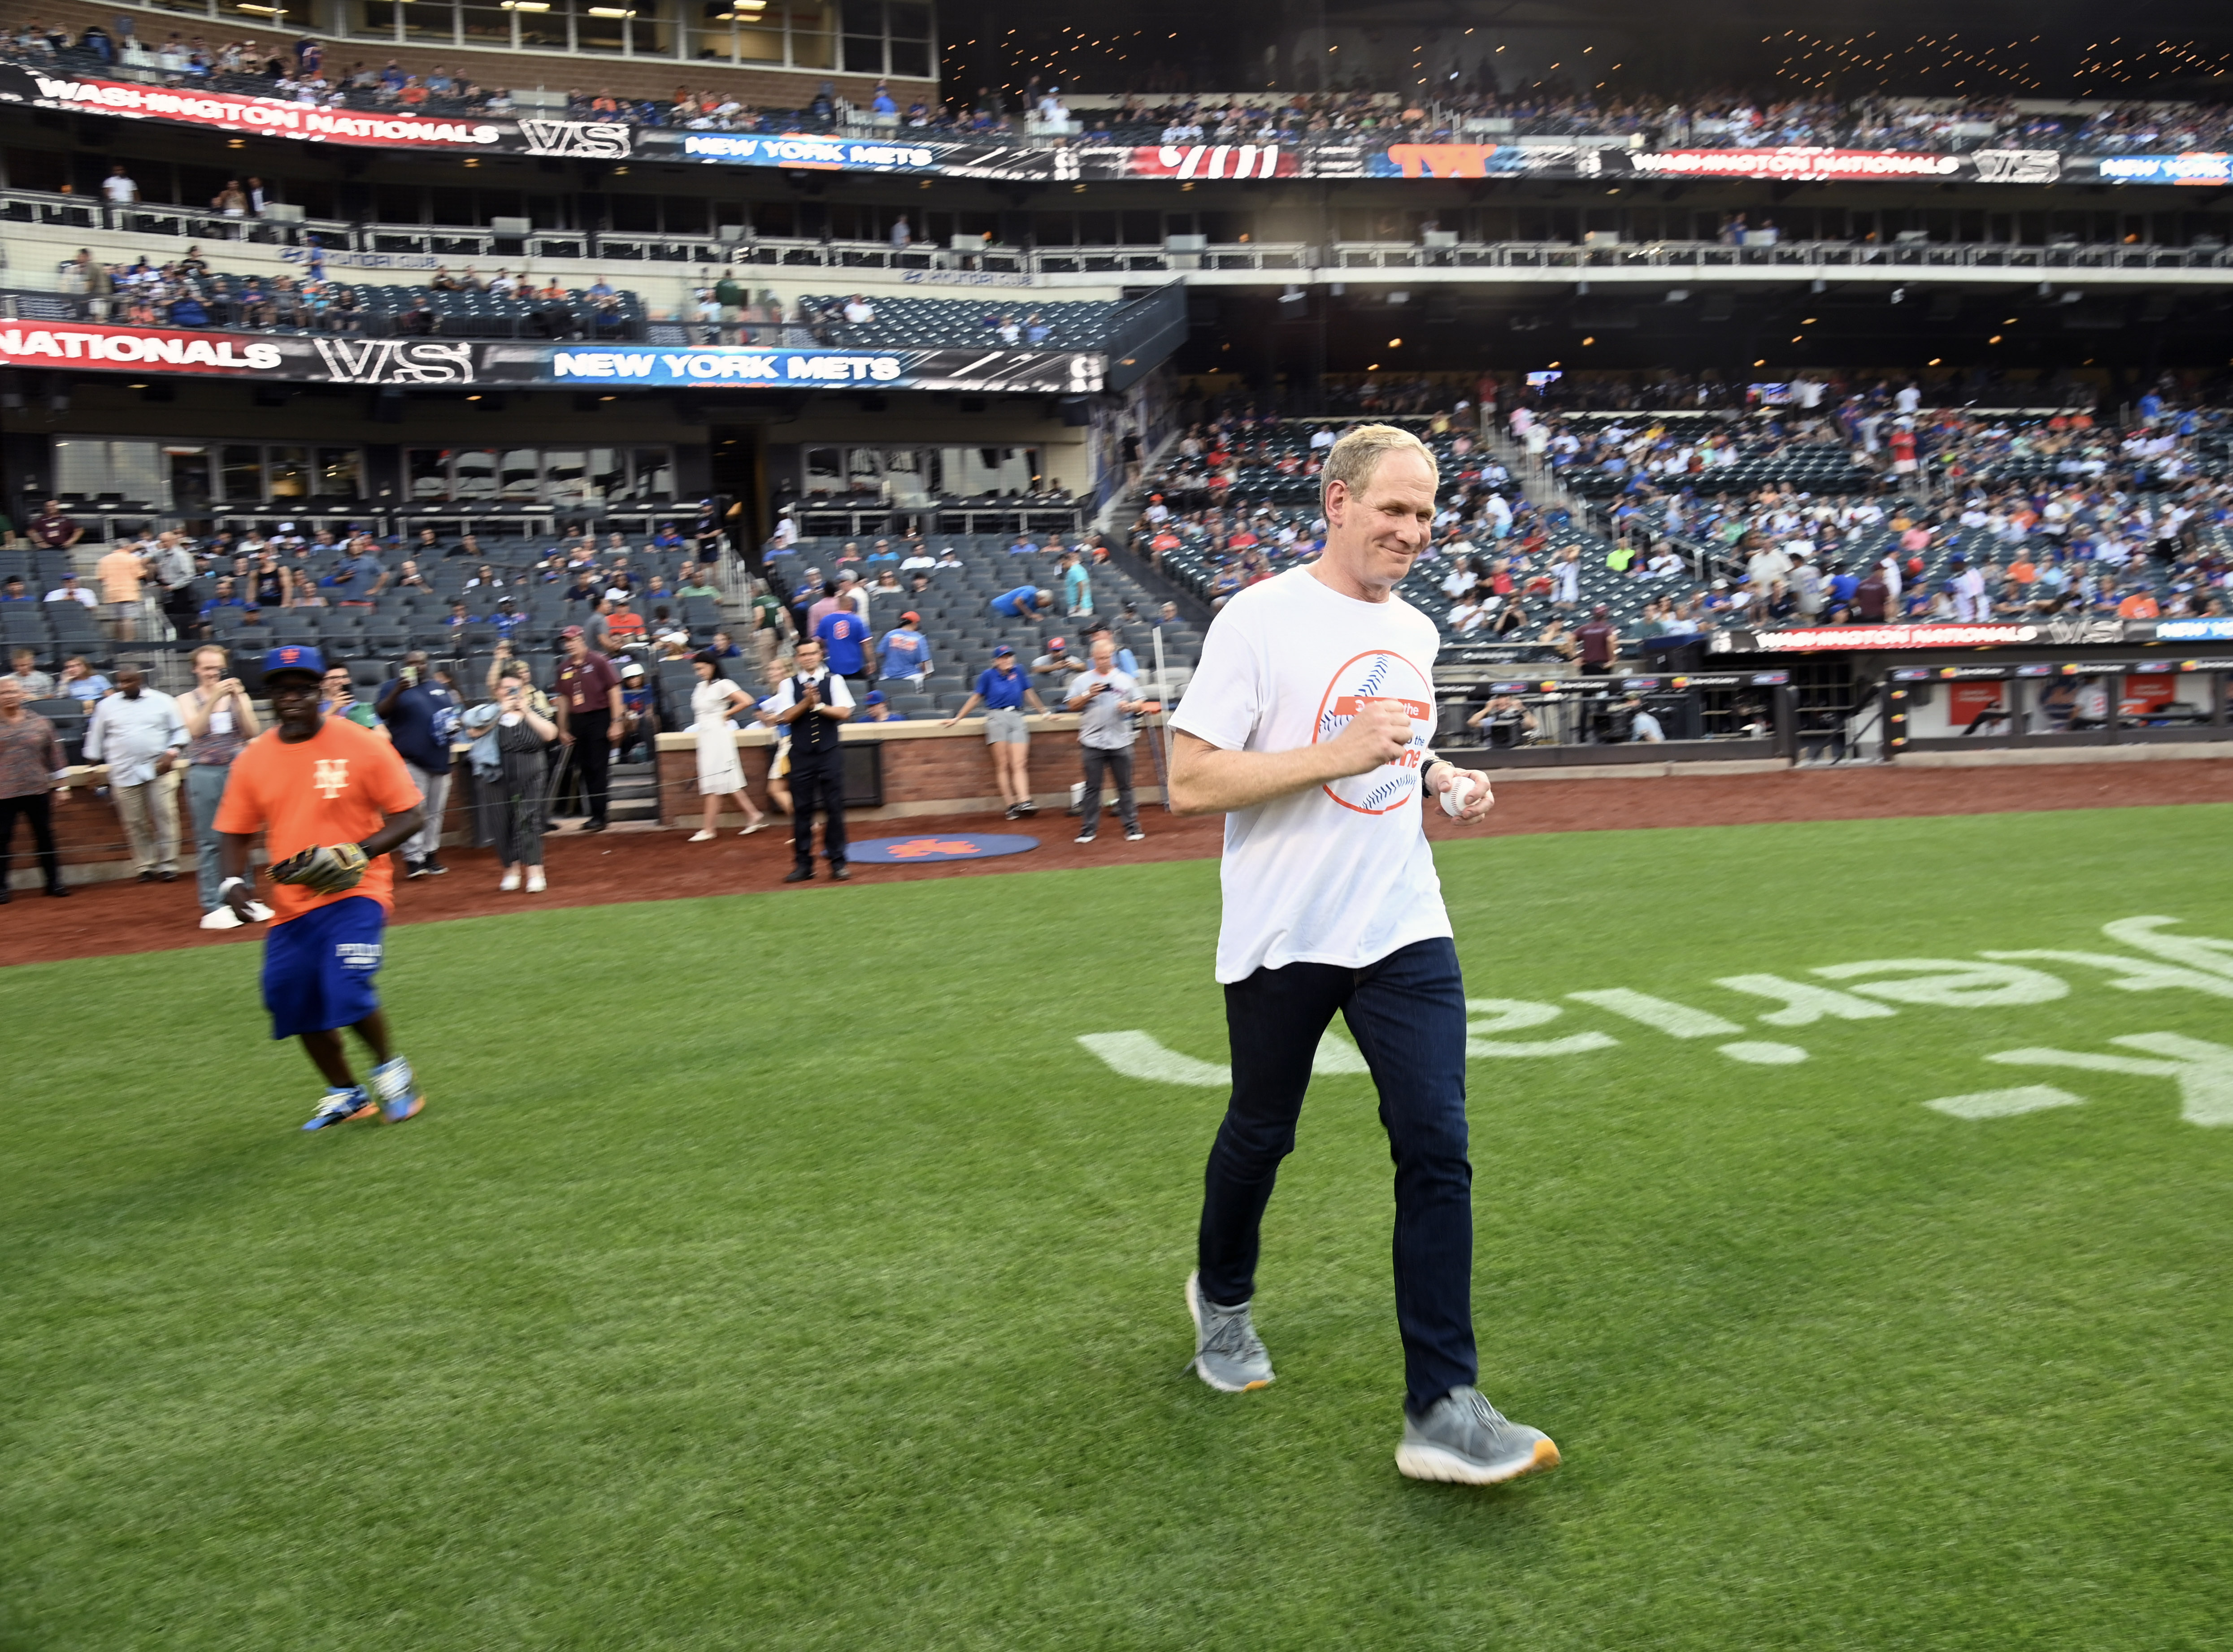 MTA Chair and CEO runs on field to throw first pitch at Mets game